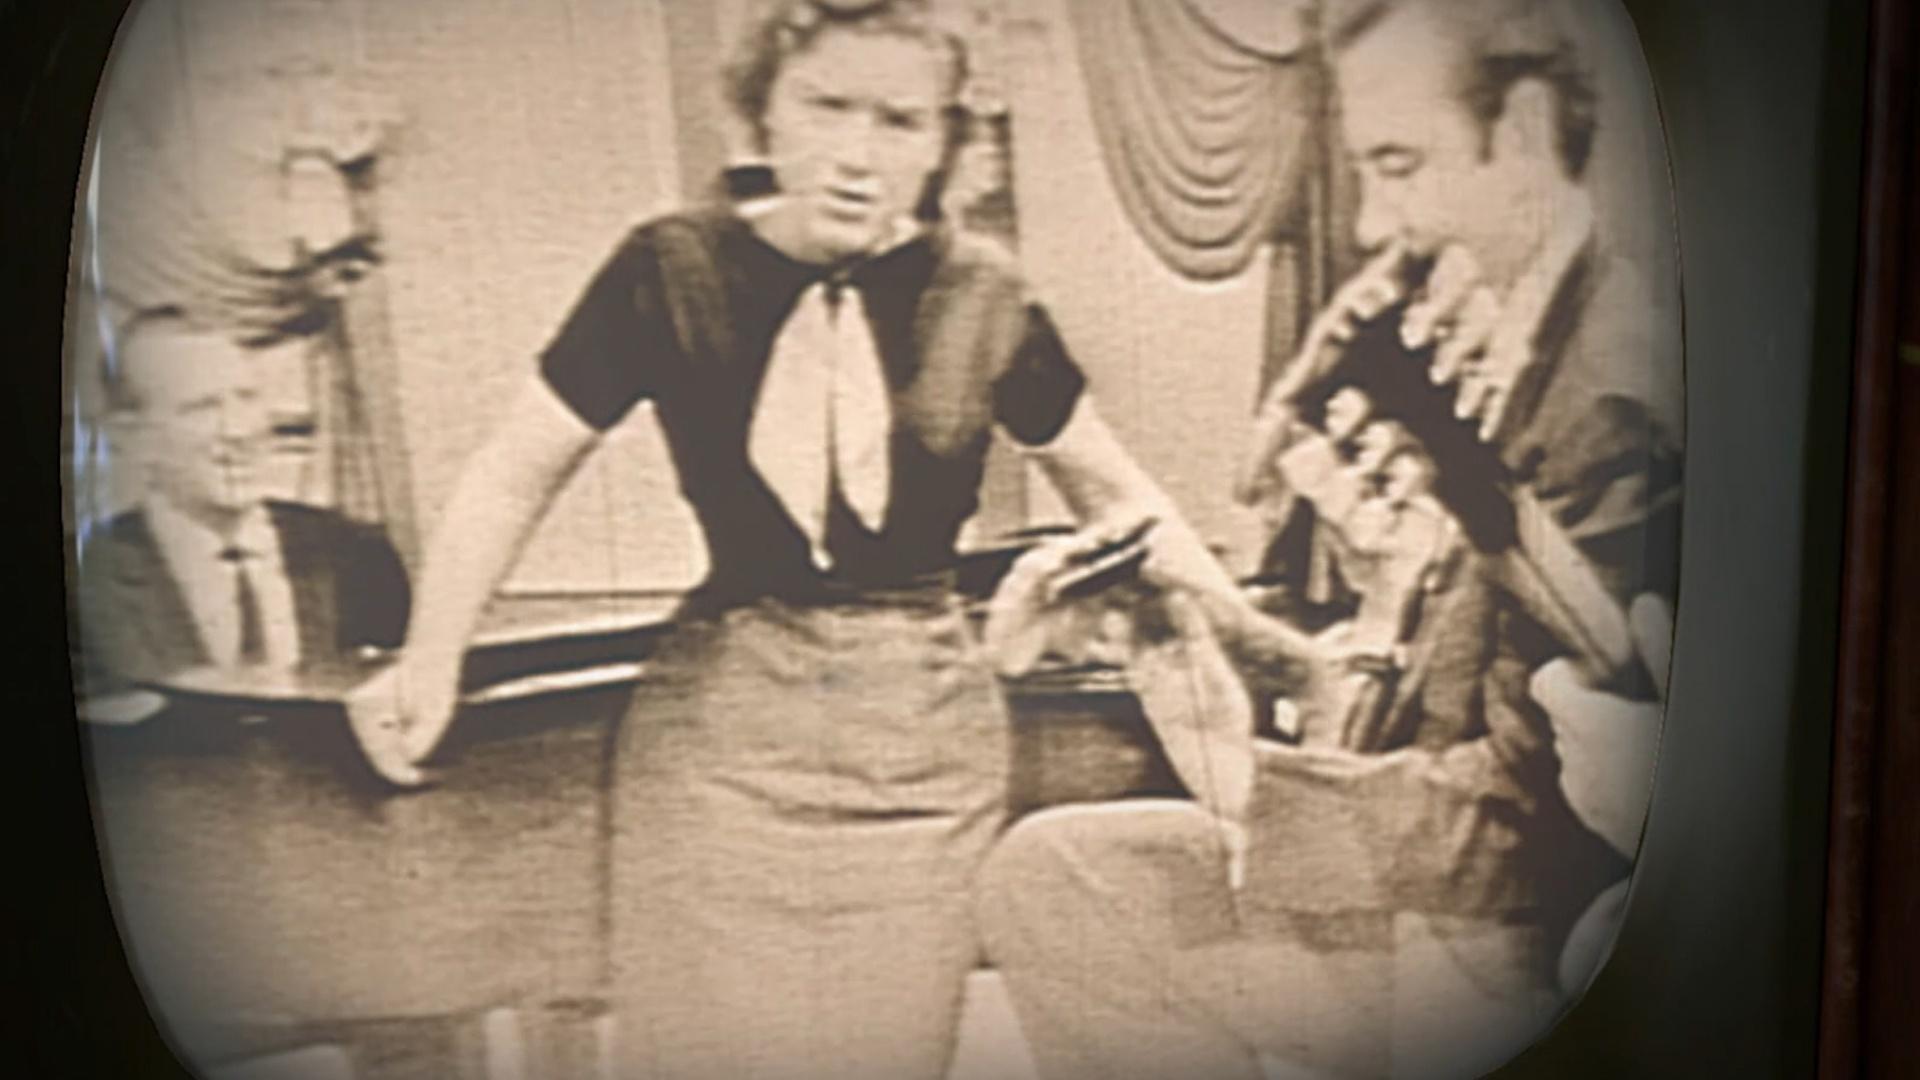 Listen to how Patsy Cline fibbed to perform on CBS. Season 31